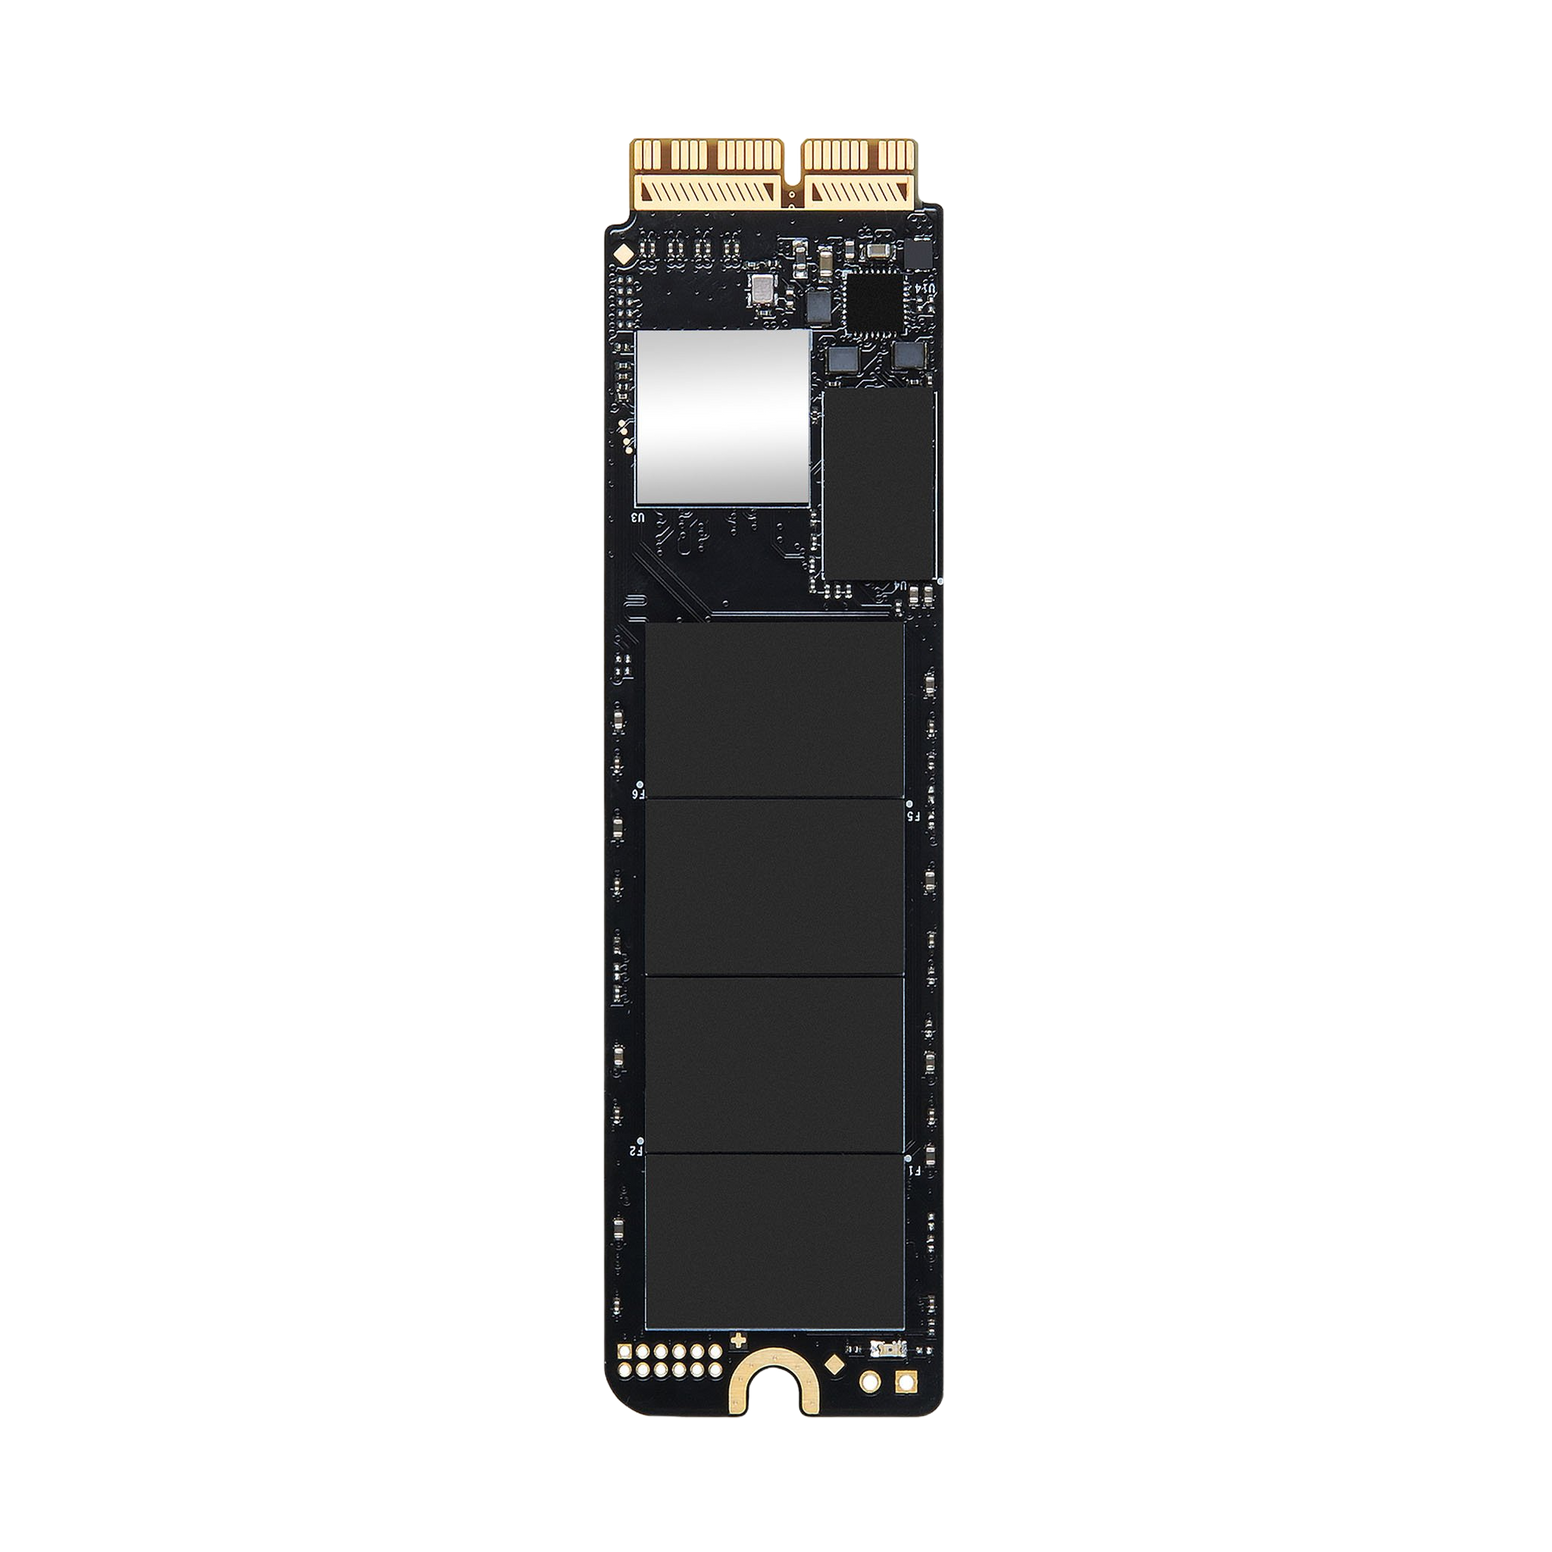 Transcend 240GB Jet Drive 850 SSD Only for MacBook Pro (Late 2013 - Early 2015), MacBook Air (Mid 2013 - Early 2015), Mac mini (Late 2014), Mac Pro (Late 2013) - NVMe Gen3 x4